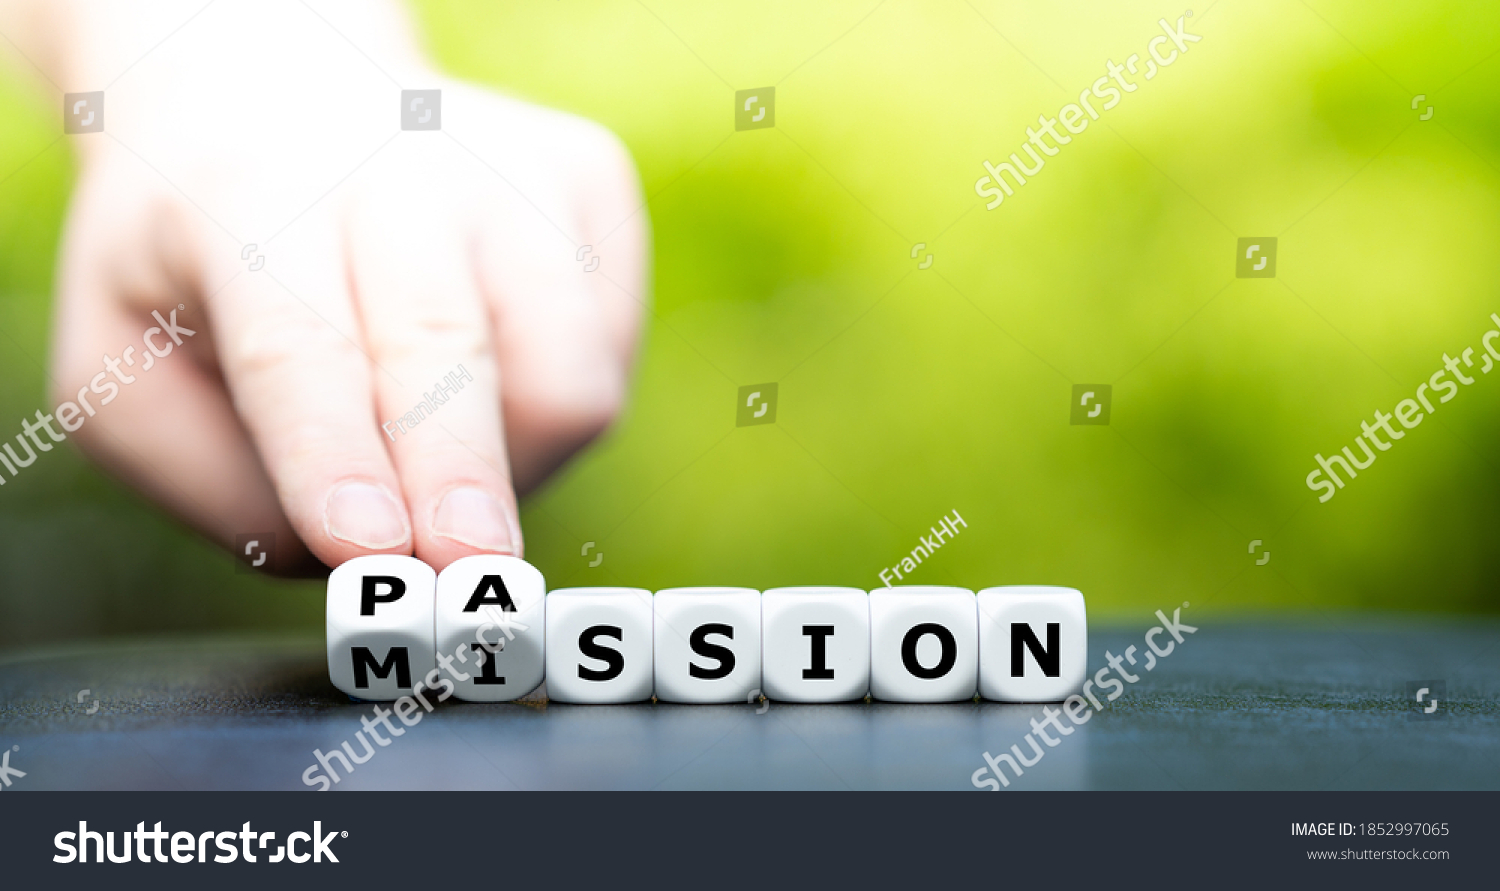 Do your mission with passion. Hand turns dice and changes the name "mission" to "passion". #1852997065